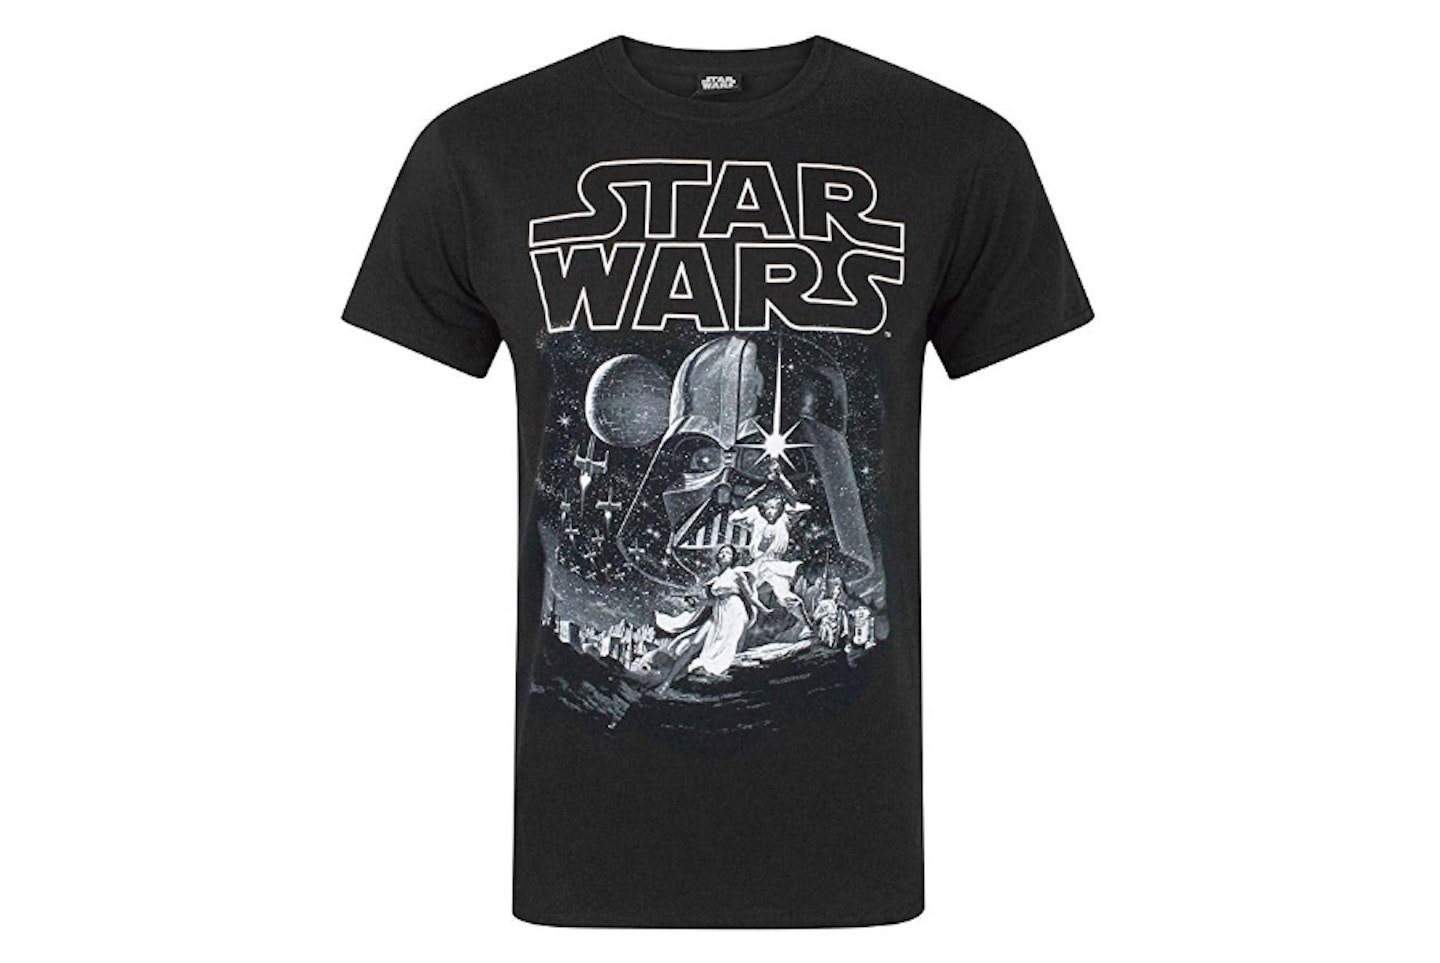 Star Wars A New Hope Poster Men's T-Shirt, from £10.99